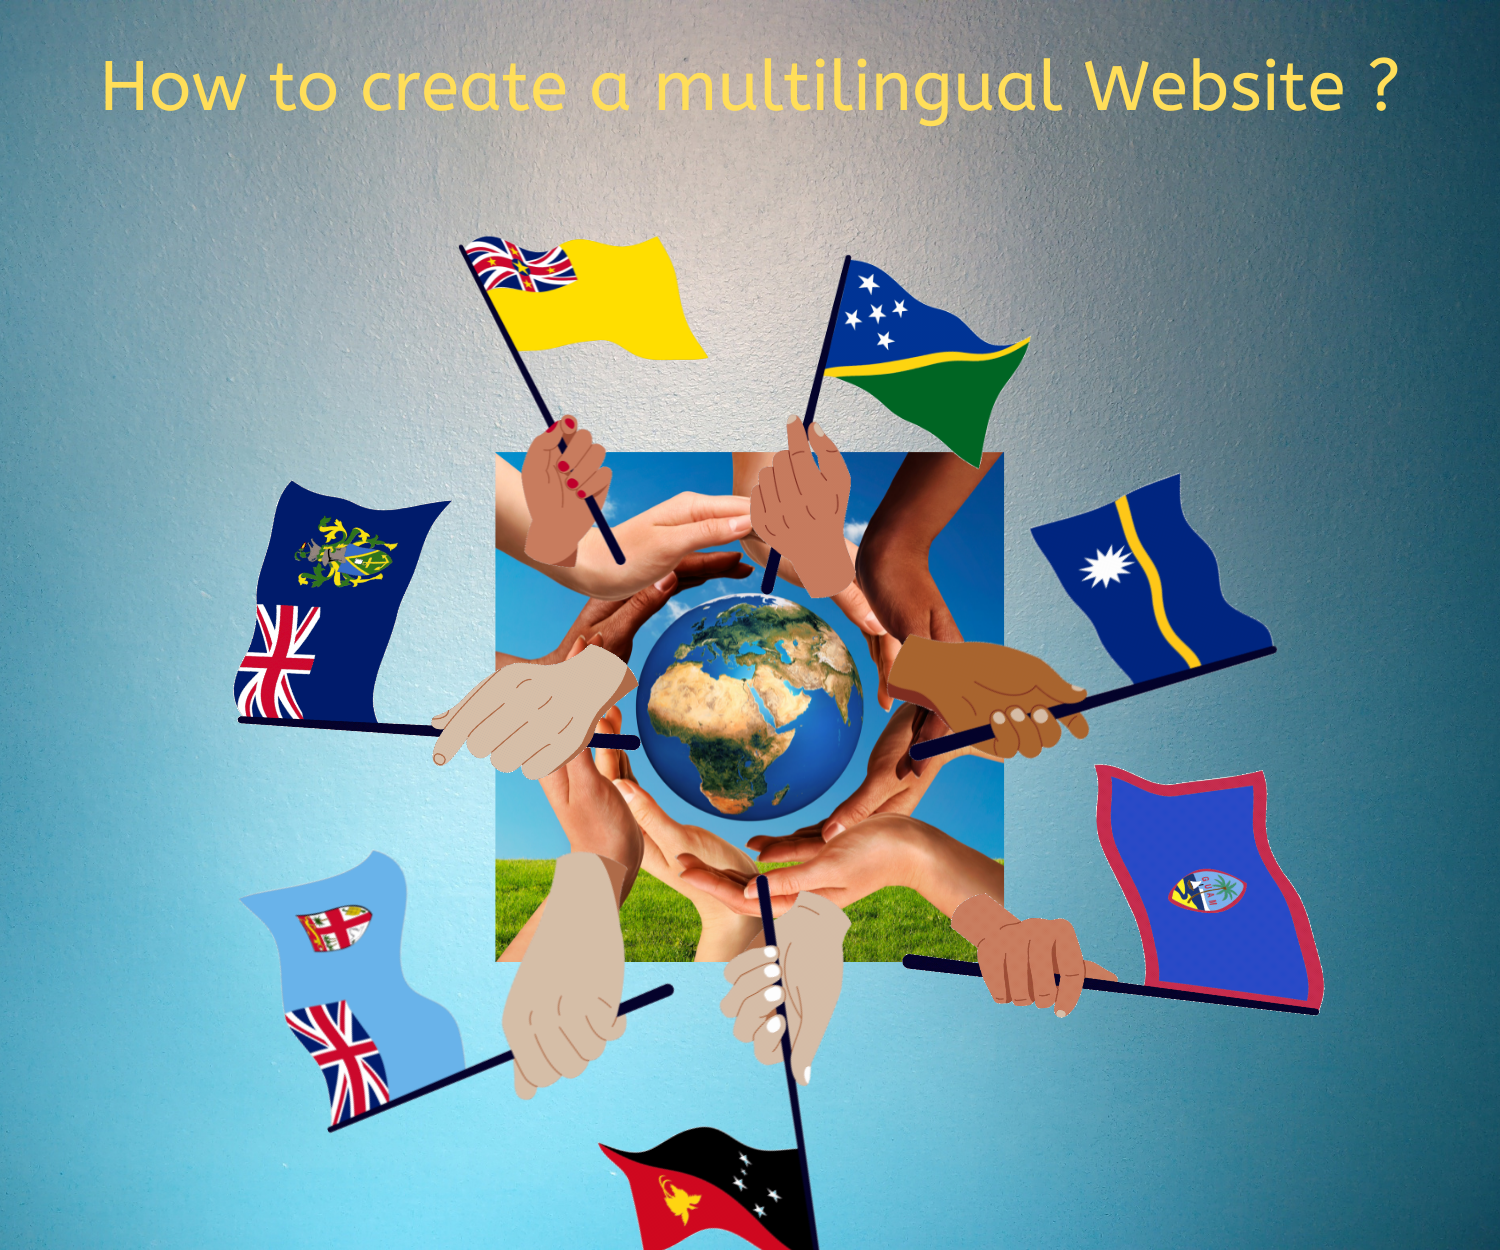 How to create a multilingual WordPress site with ease?